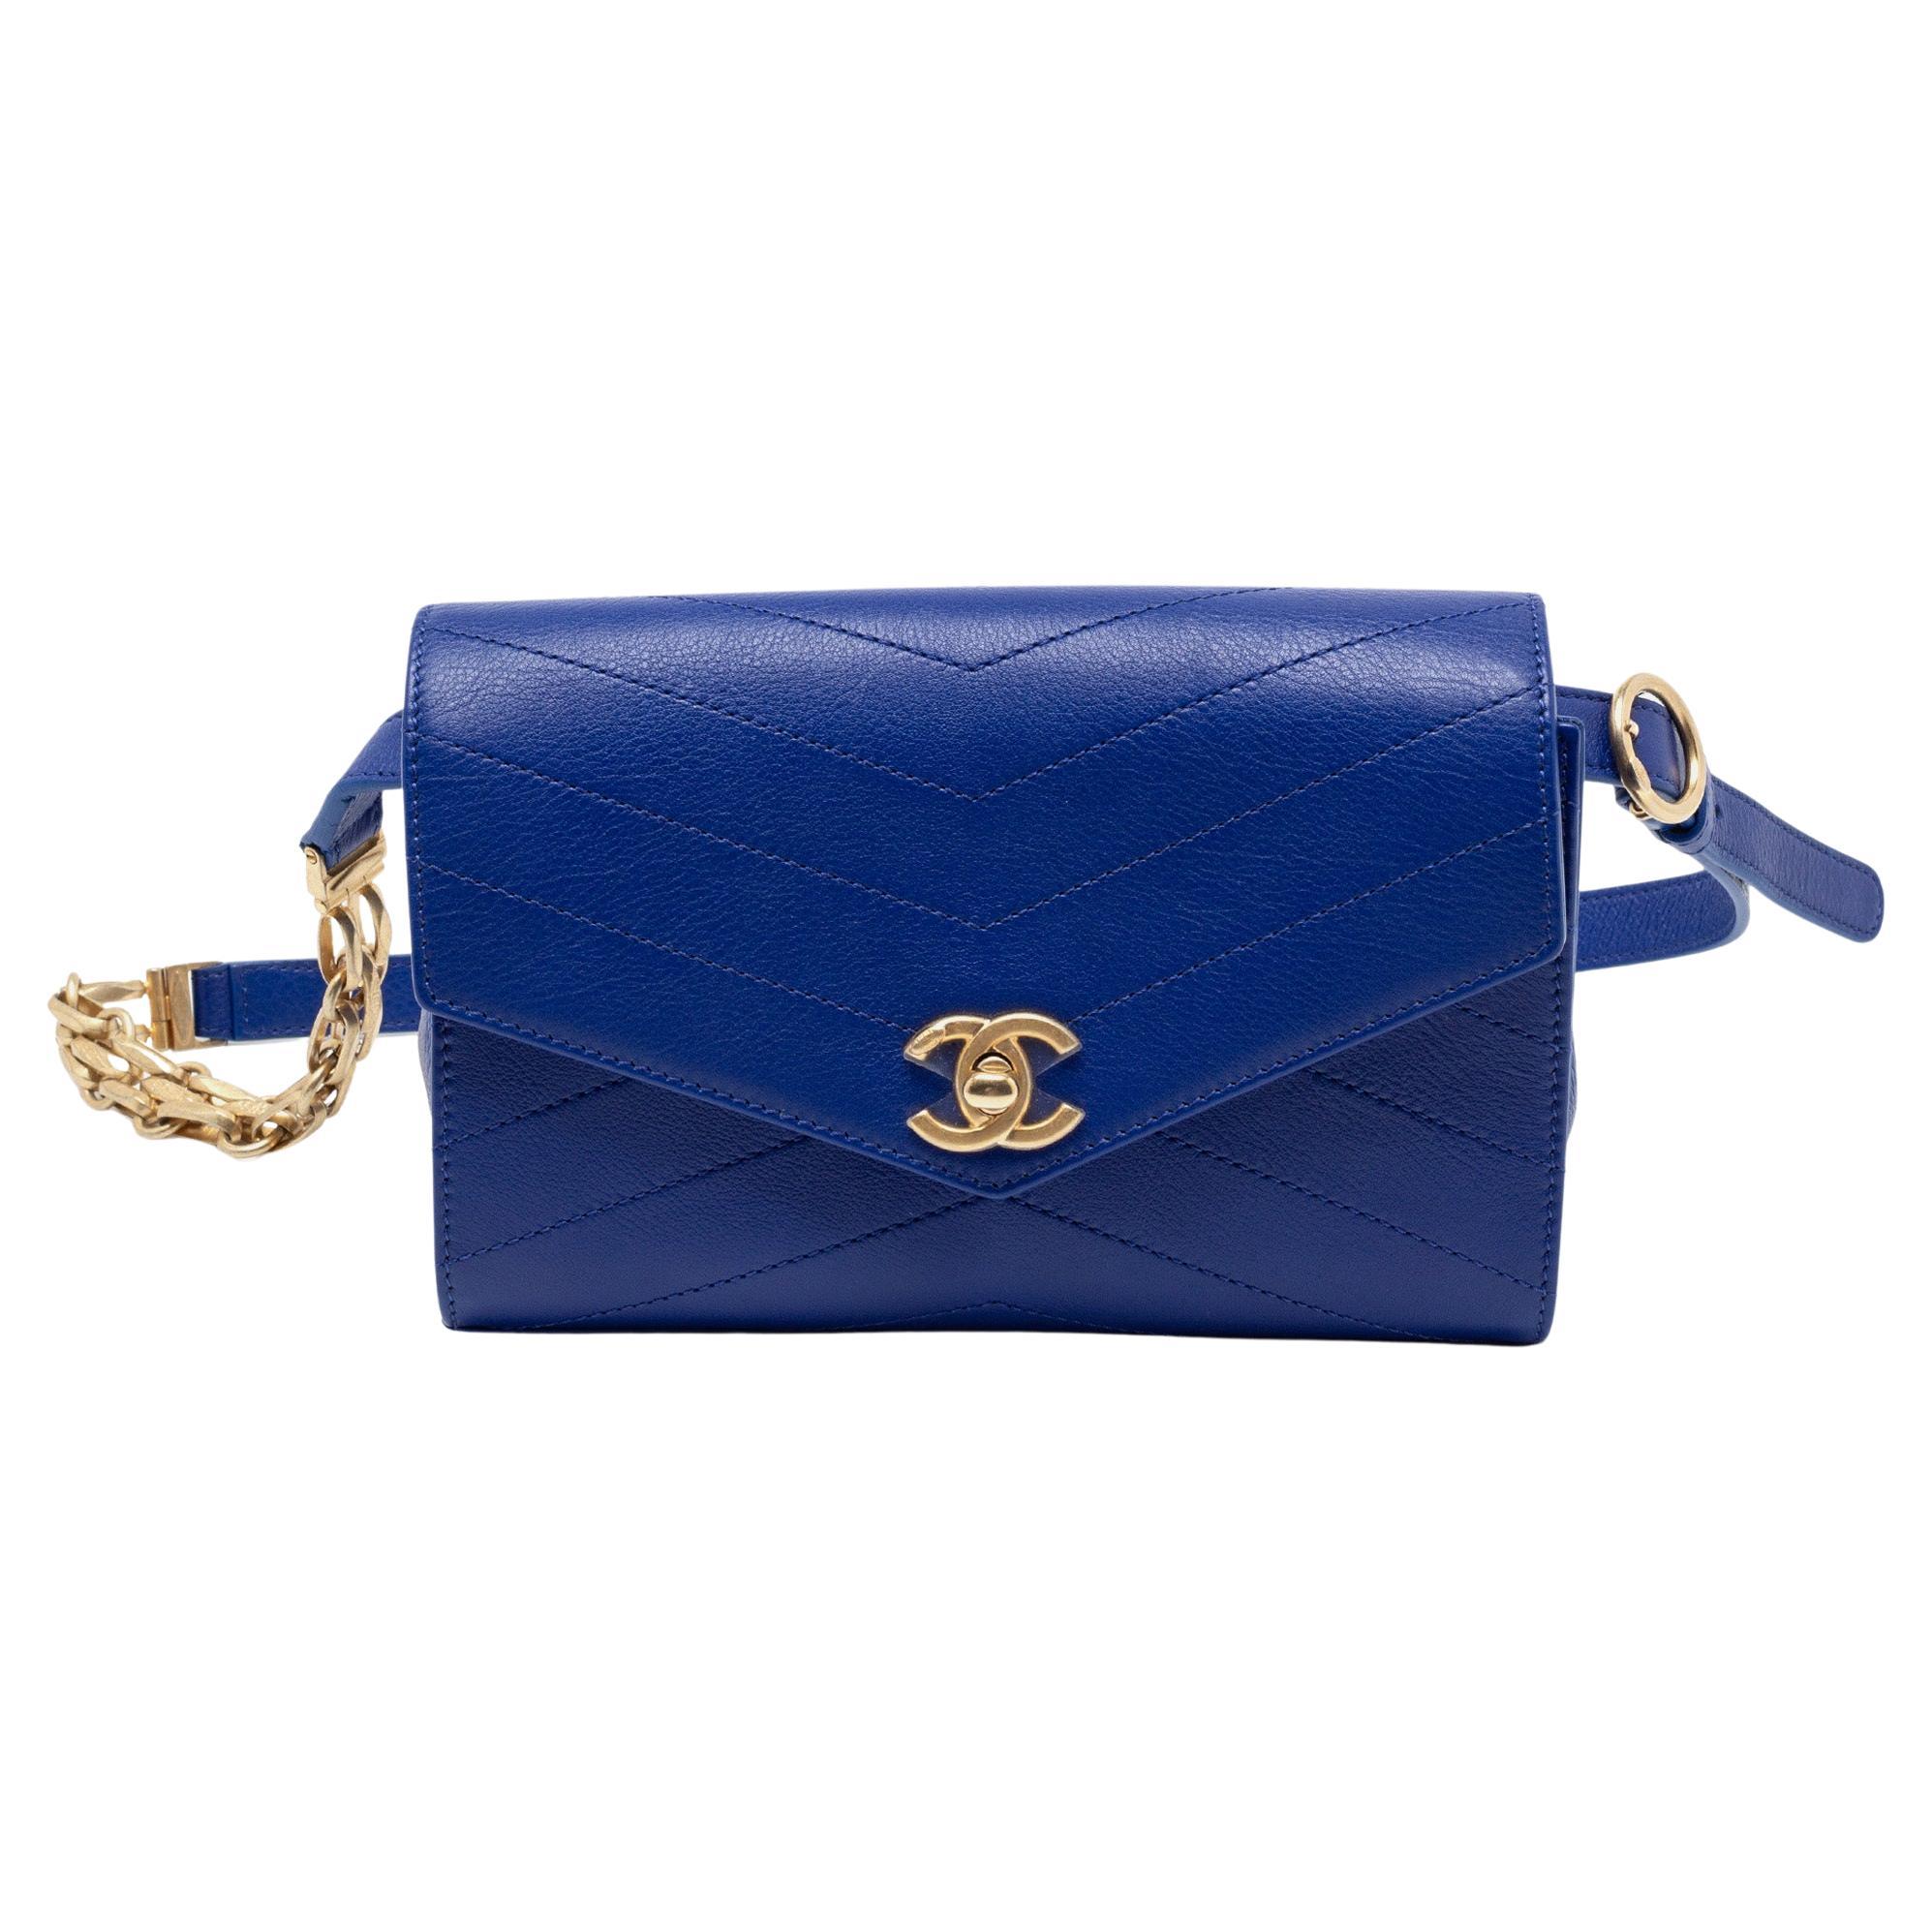 Chanel Blue Chevron Stitched Leather Small Coco Waist Bag